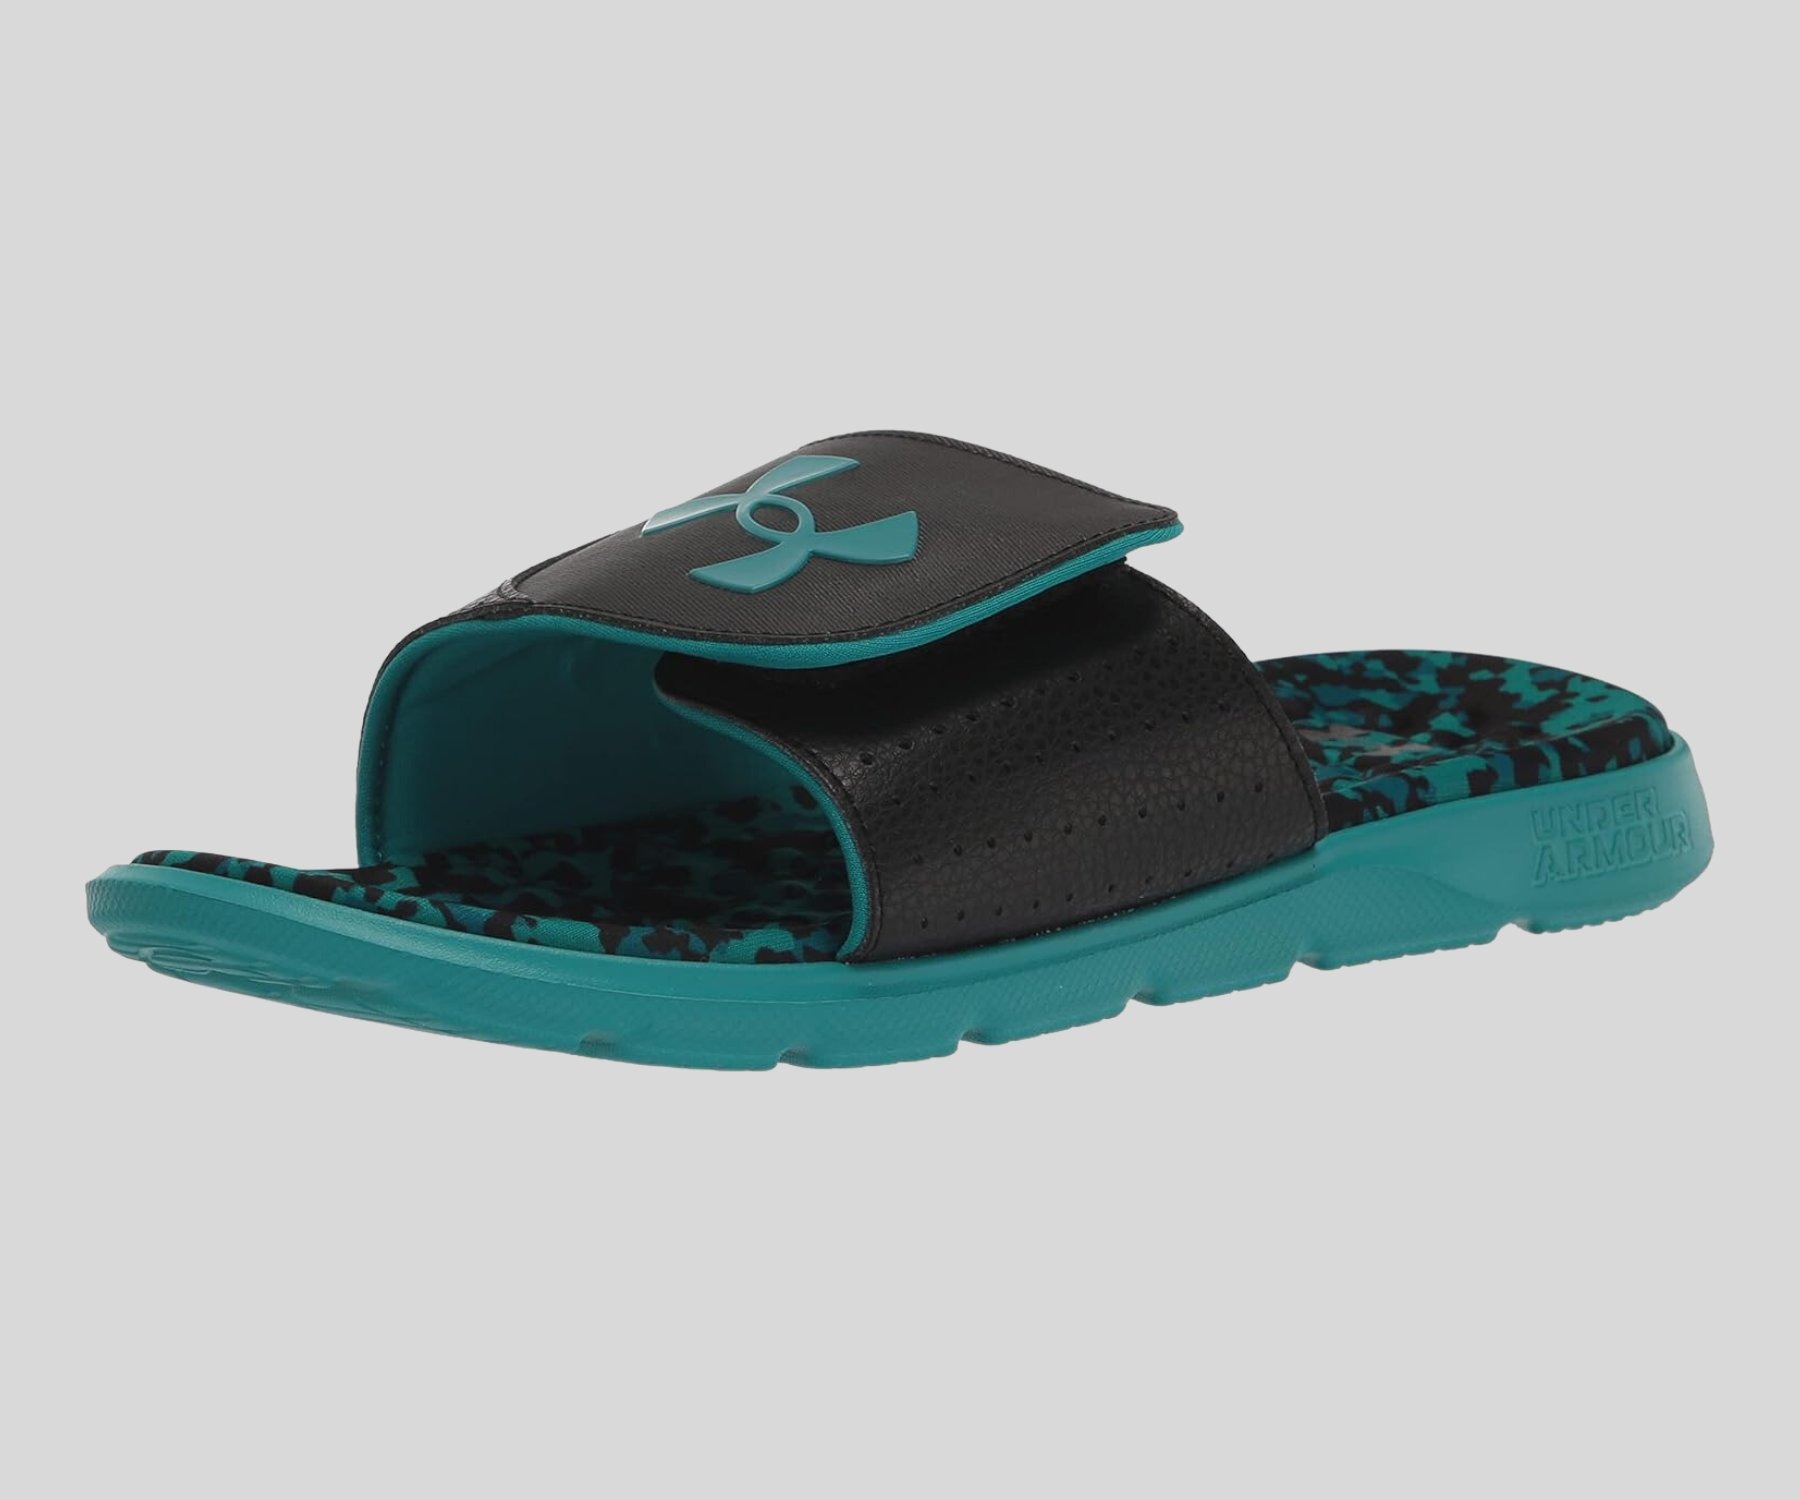 Under Armour Mens Ignite Pro Graphic Slide Review